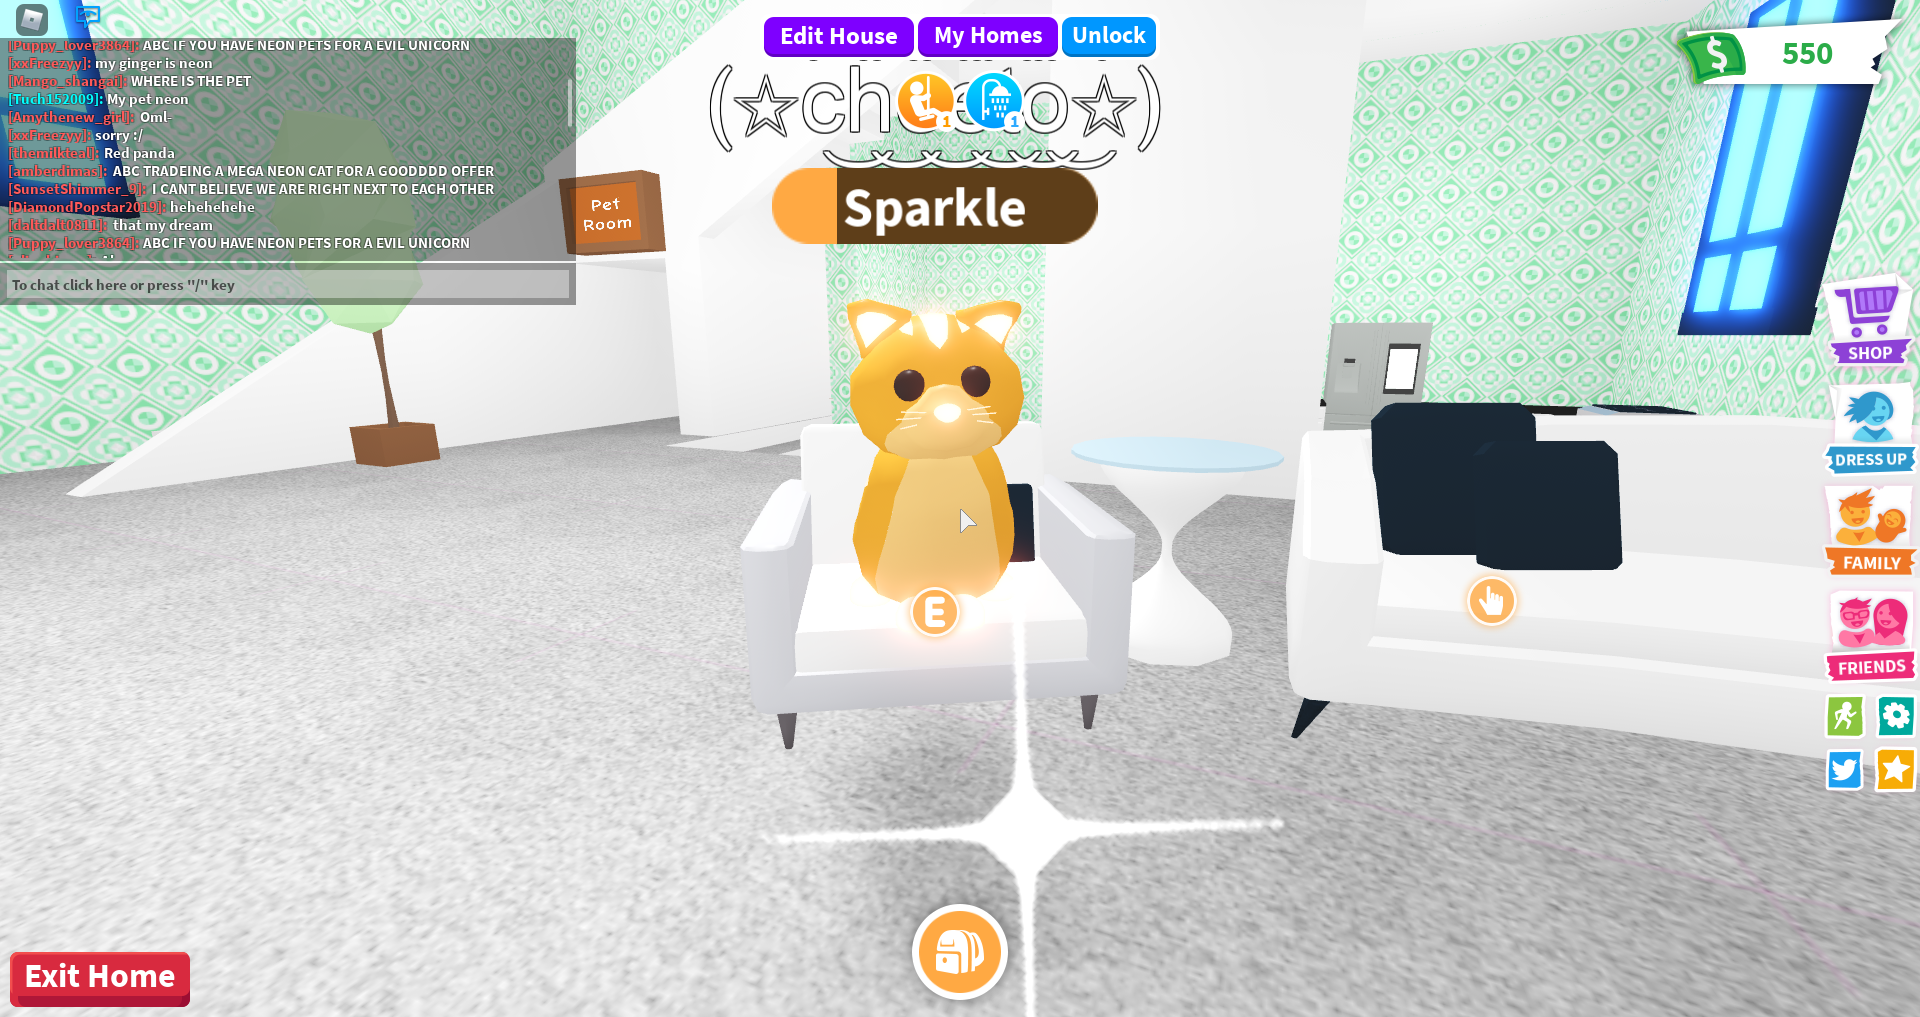 How Much Is A Ginger Cat In Adopt Me Worth - roblox adopt me ginger cat worth